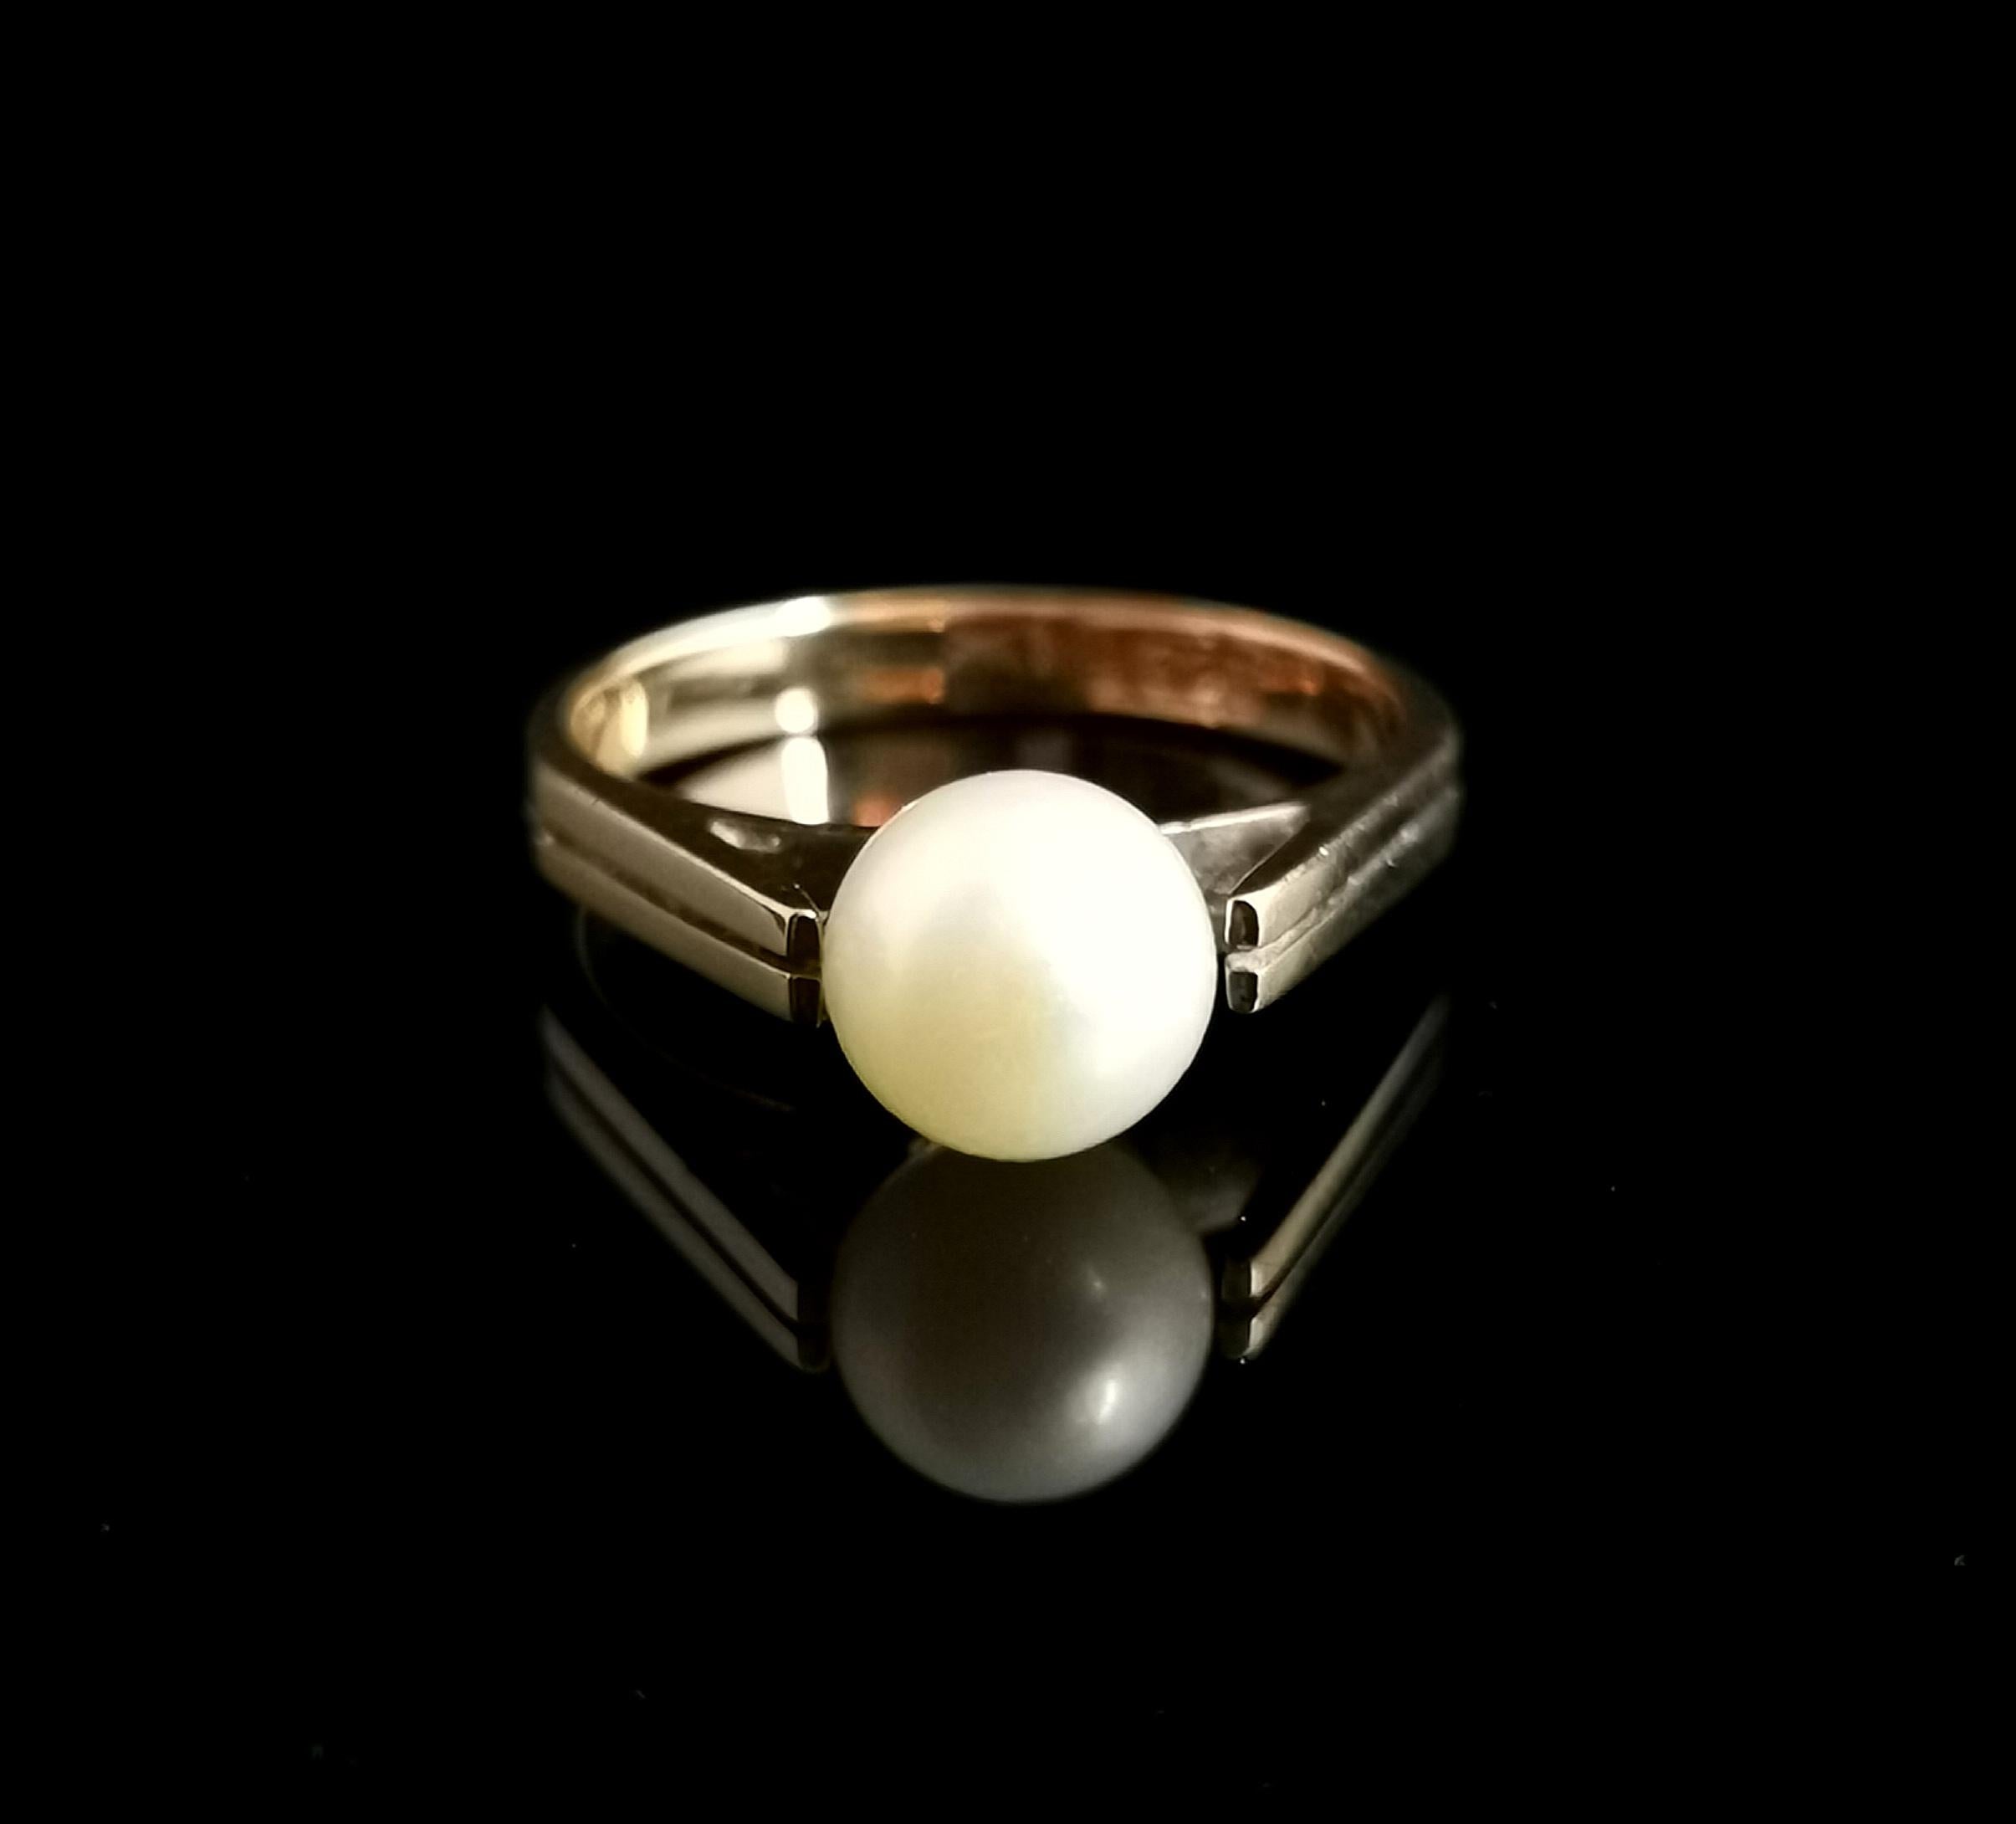 Vintage c1940s Pearl Solitaire Ring, 9 Karat Yellow Gold 6